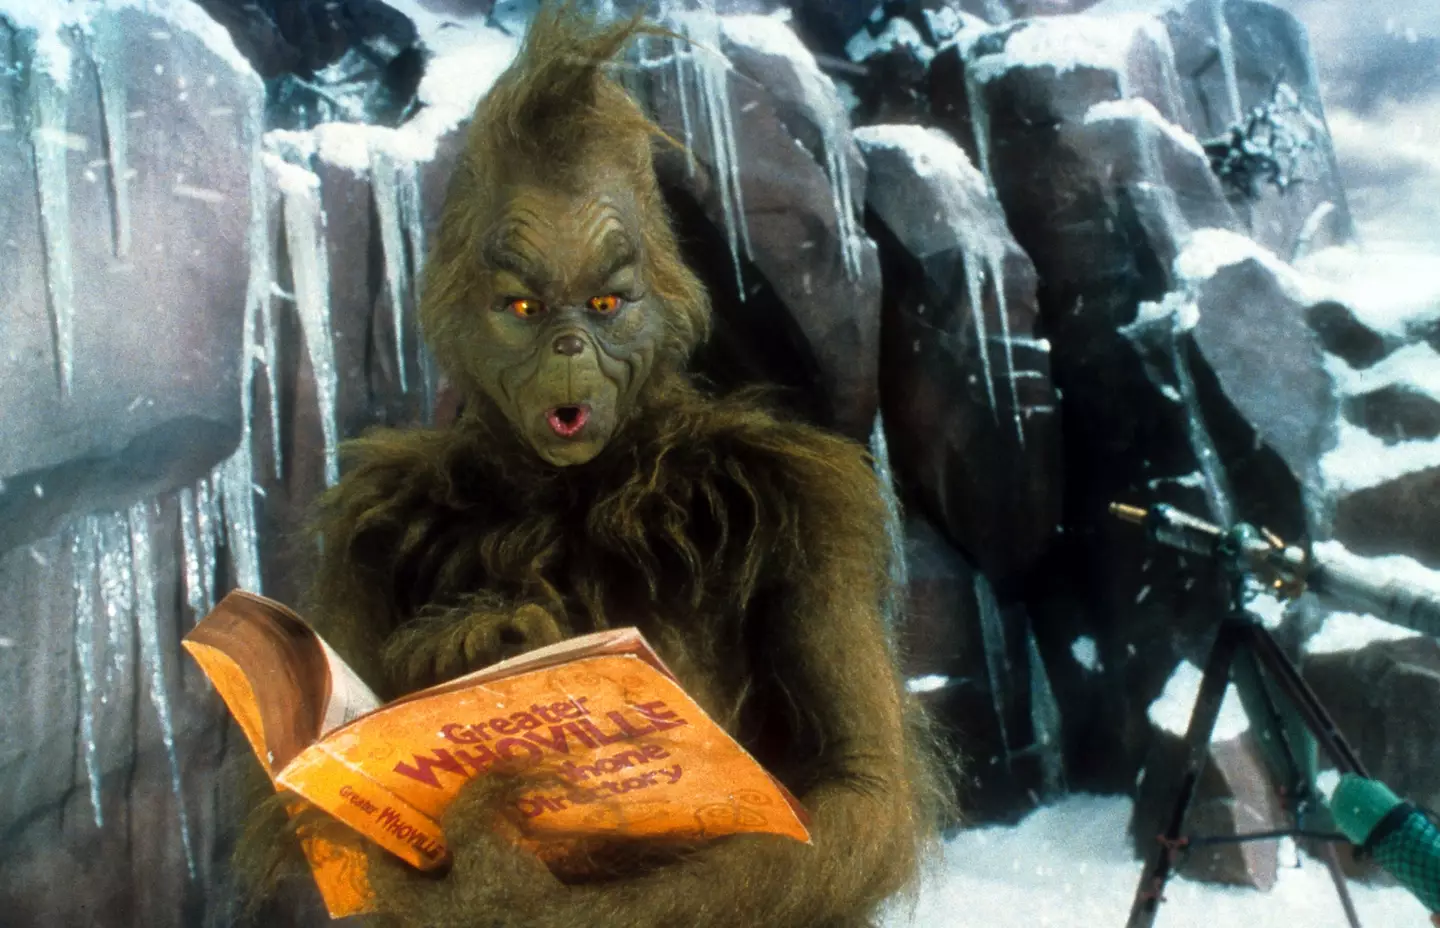 Jim Carrey starred as the Grinch in the 2000 festive film.